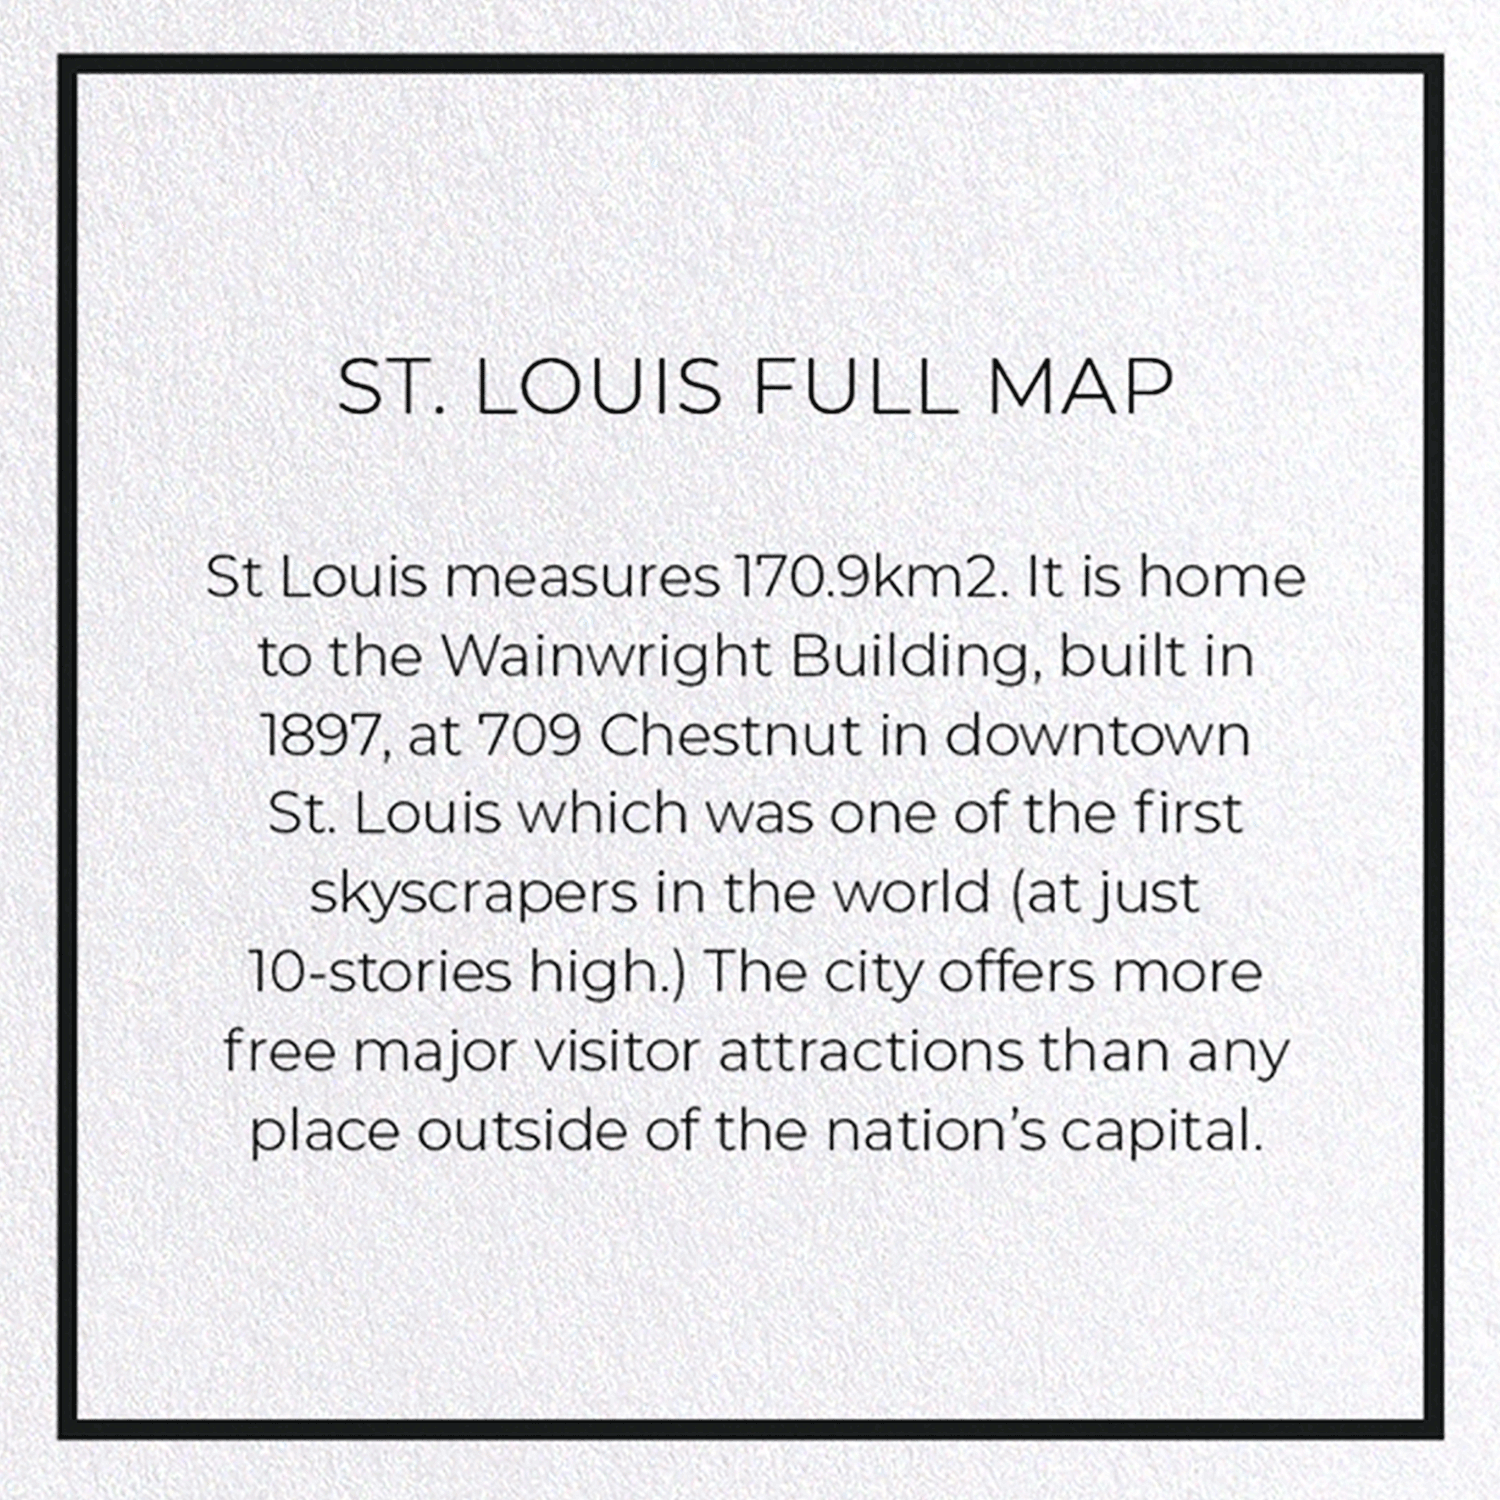 ST. LOUIS FULL MAP: 8xCards